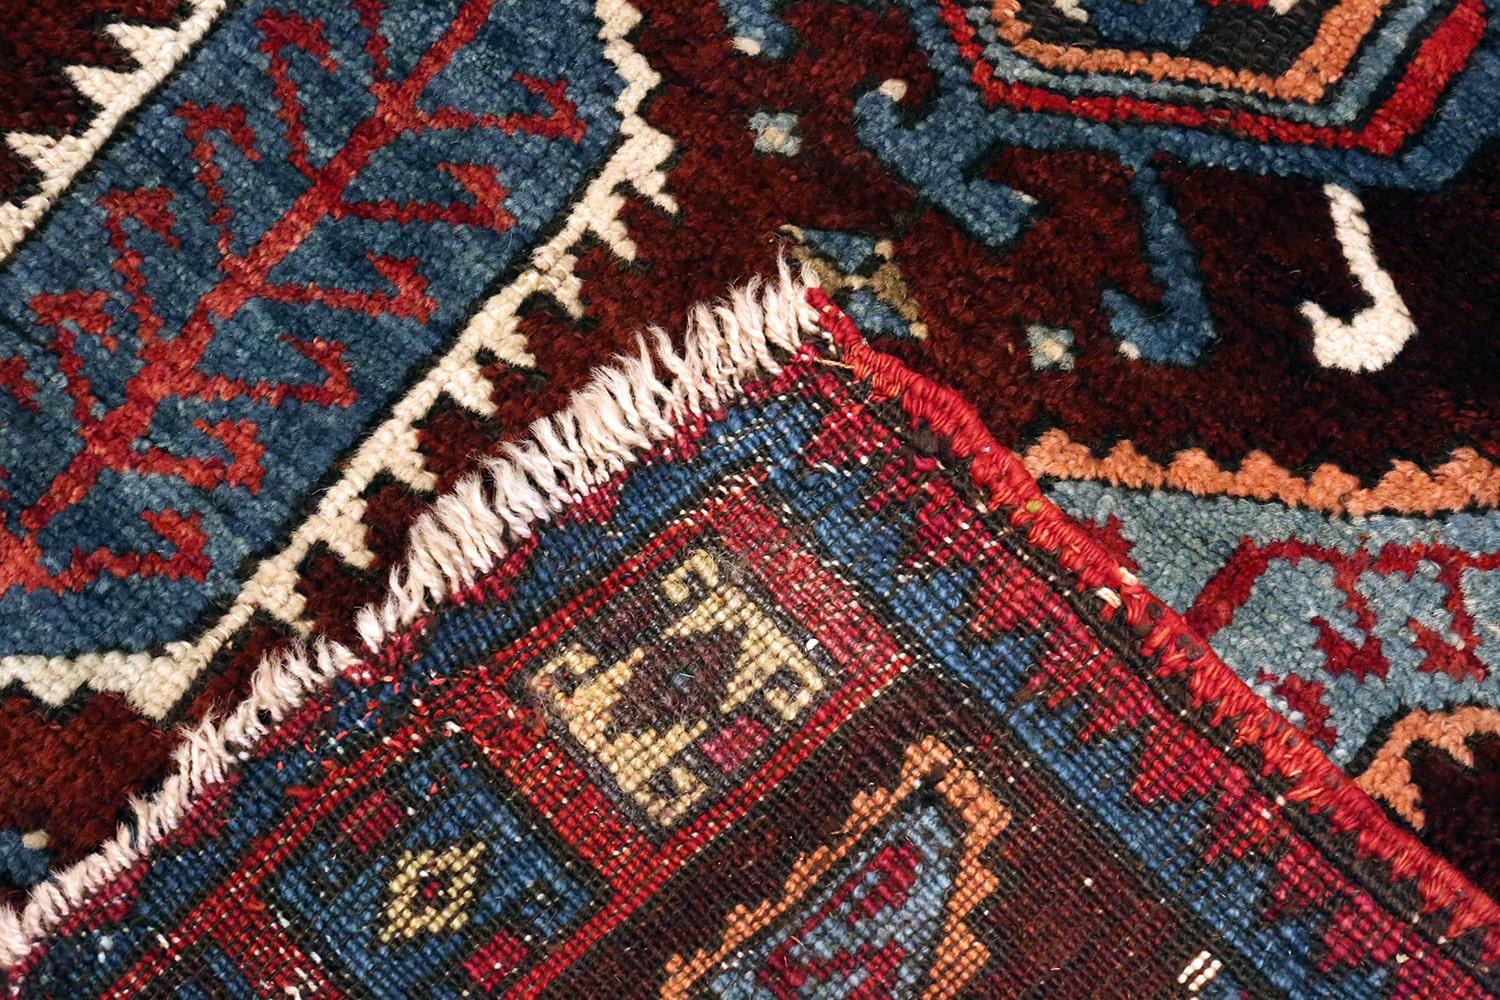 Tribal Small Antique Turkish Yastic Rug. Size: 2 ft 1 in x 3 ft 3 in (0.63 m x 0.99 m)